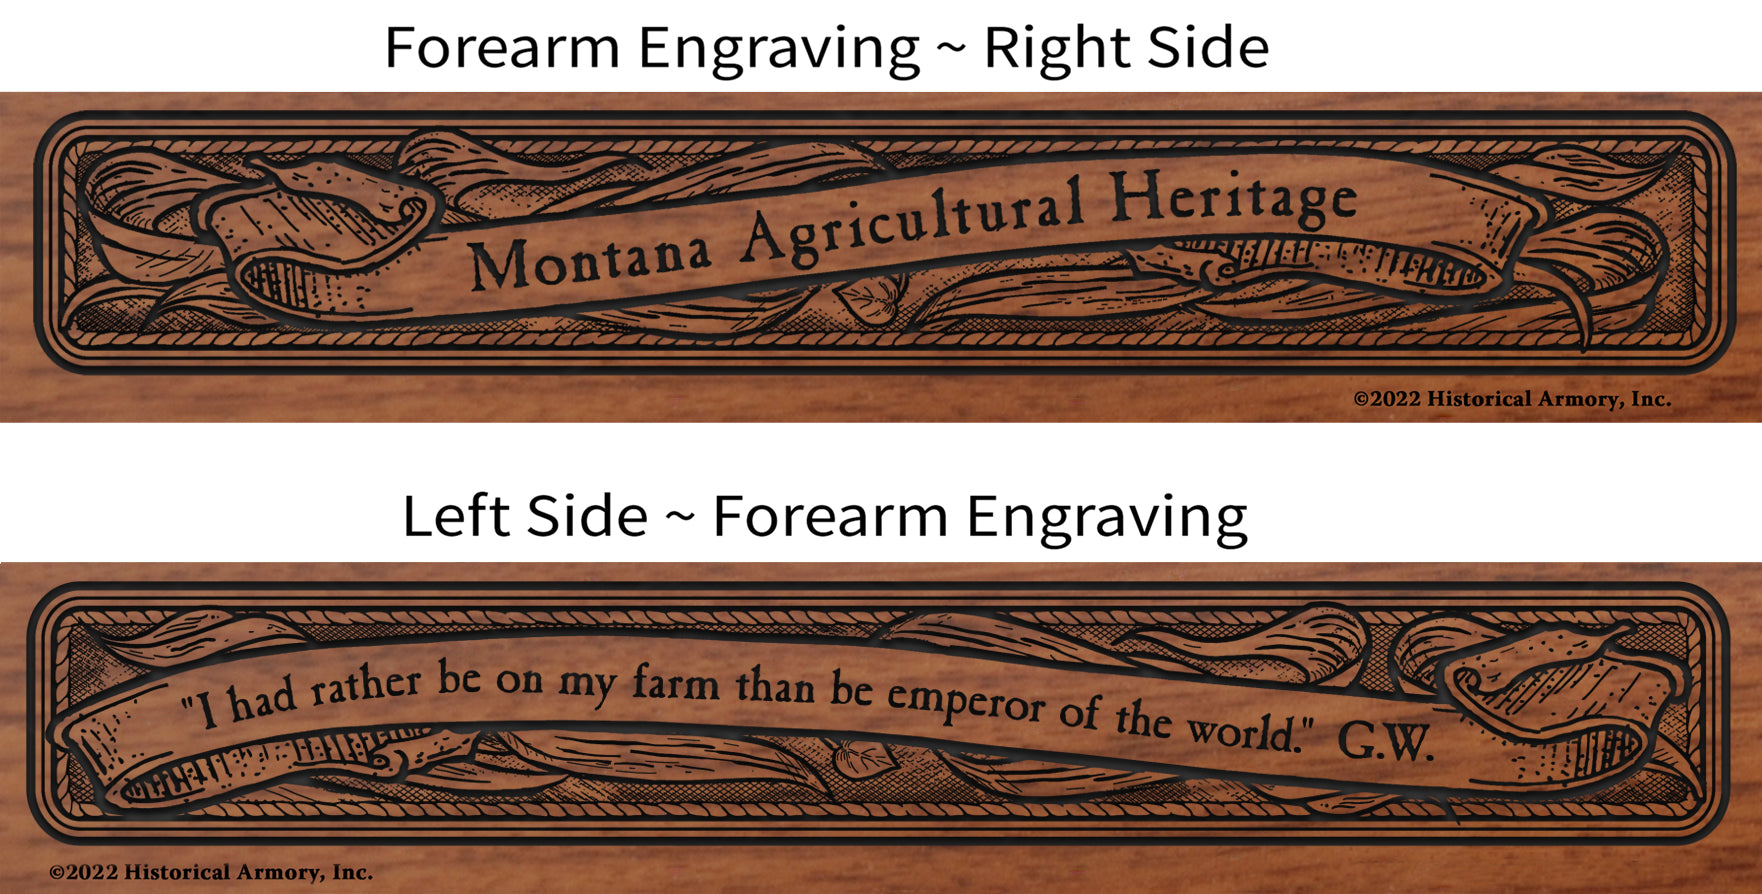 Montana Agricultural Heritage Engraved Rifle Forearm